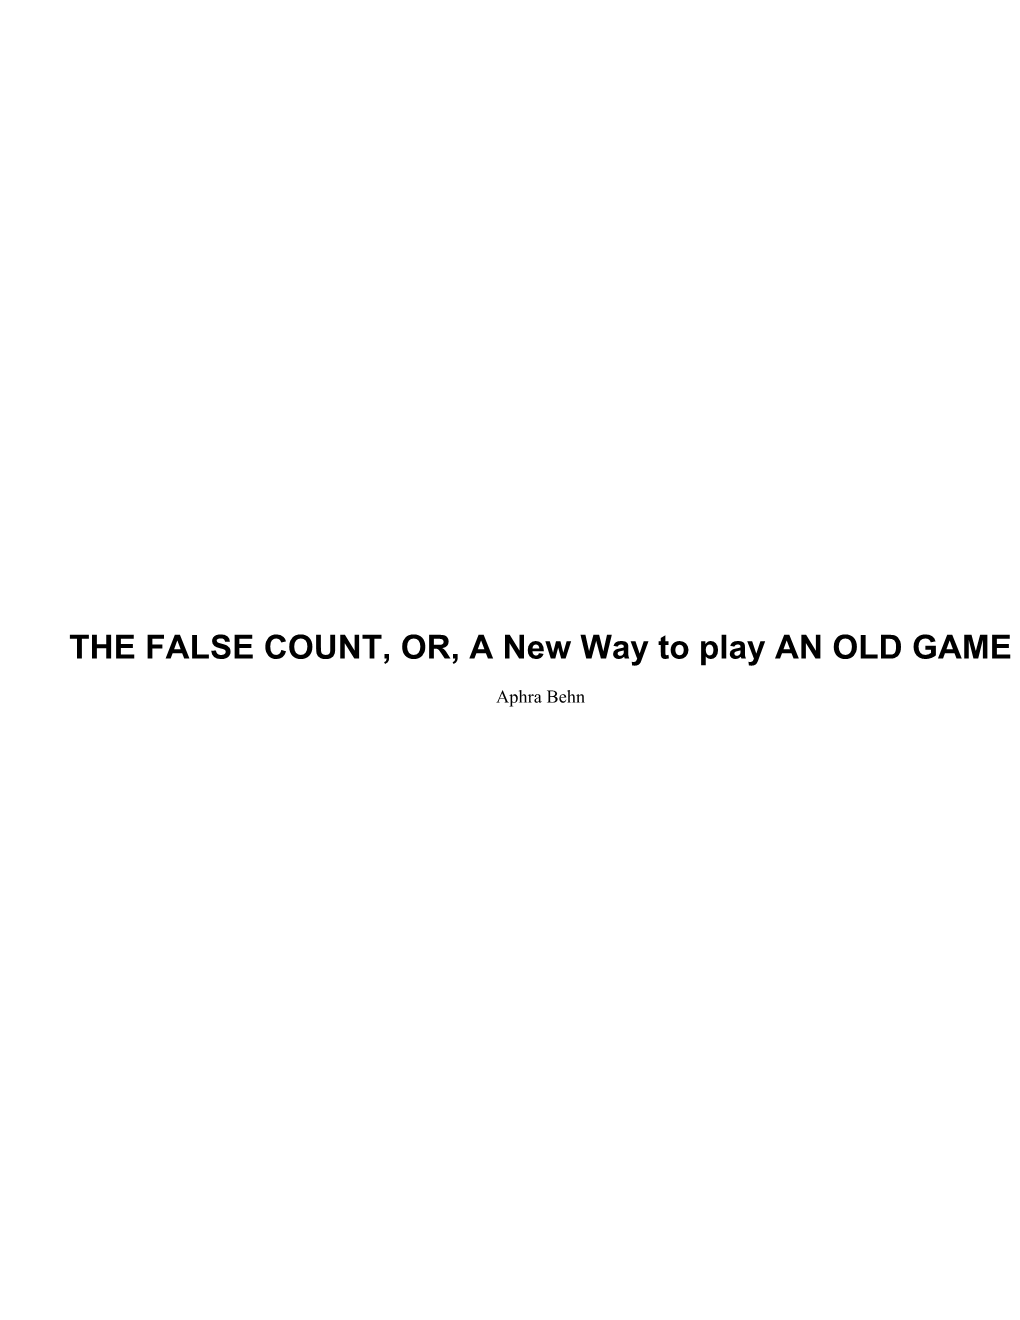 THE FALSE COUNT, OR, a New Way to Play an OLD GAME